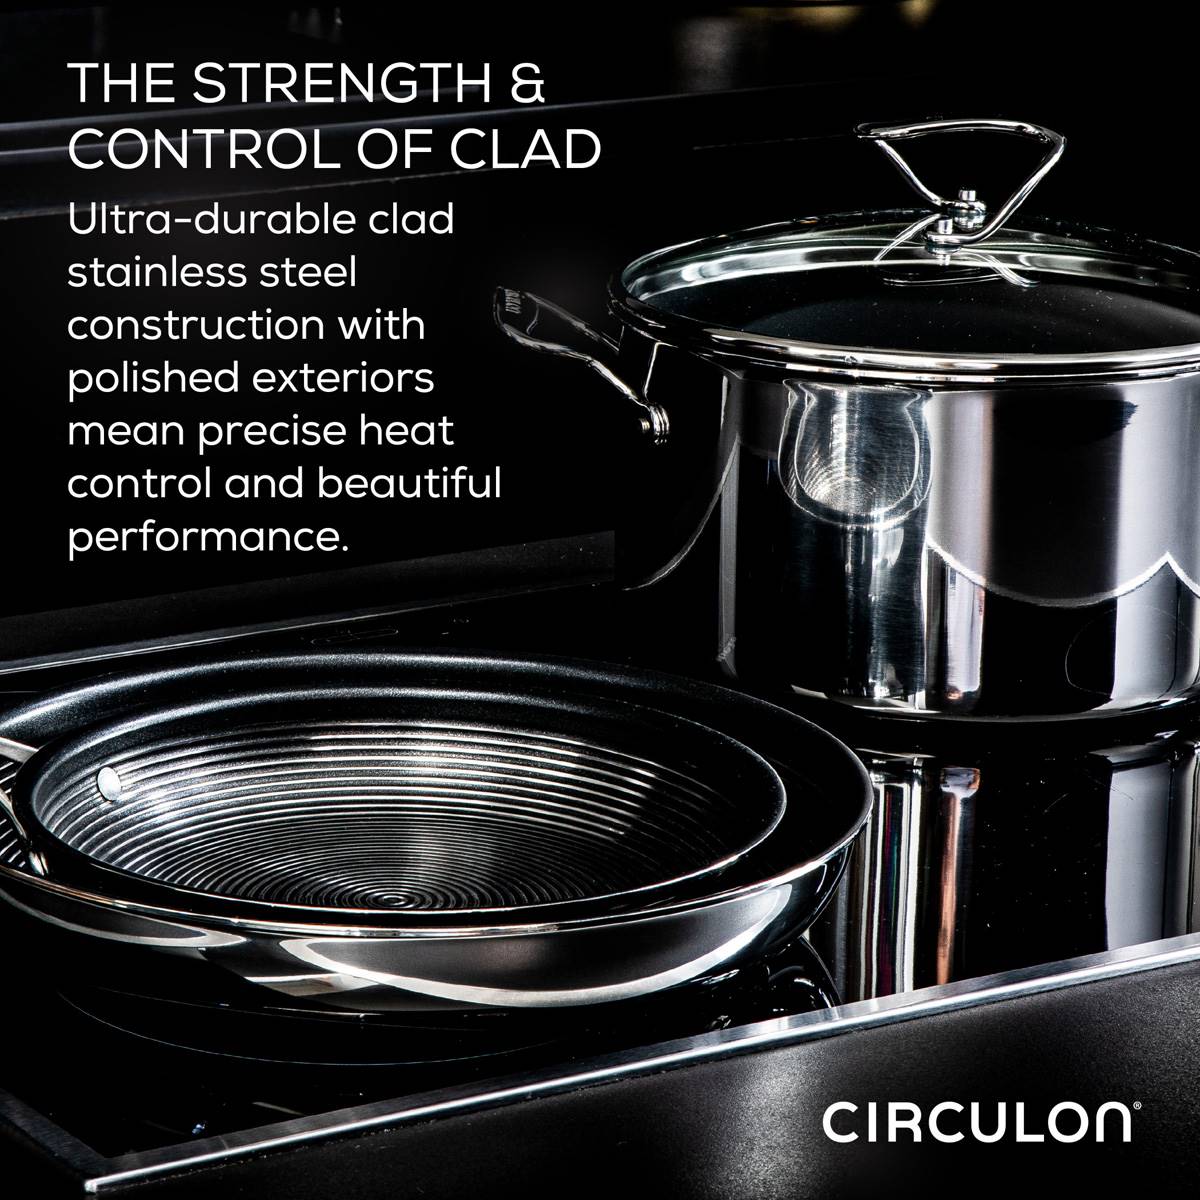 Circulon(R) 12pc. Stainless Steel Cookware And Utensil Set